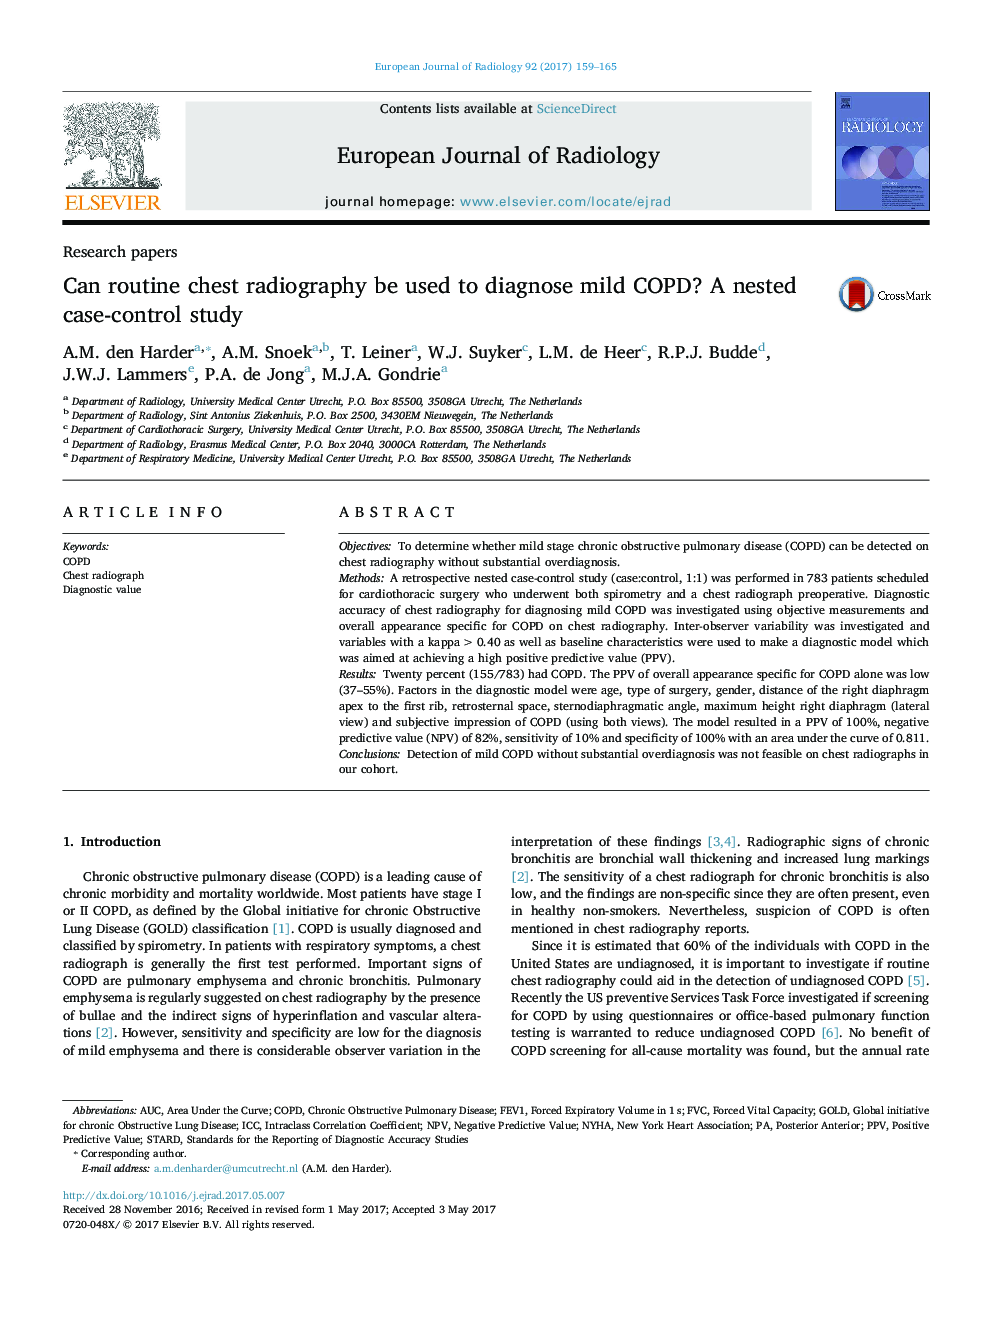 Research papersCan routine chest radiography be used to diagnose mild COPD? A nested case-control study